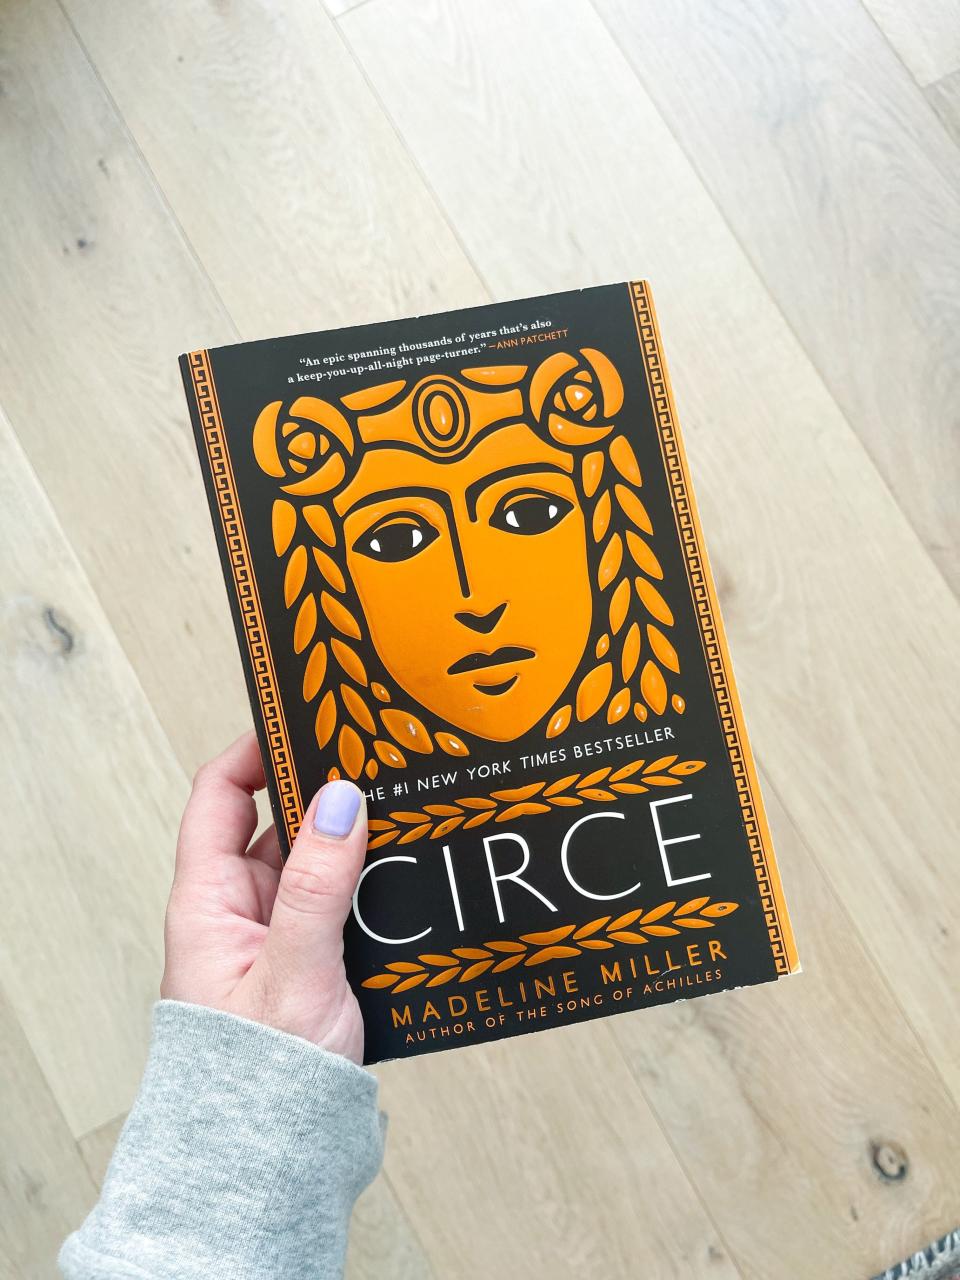 "Circe" by Madeline Miller is the featured book in this year's NEA Big Read Lakeshore from Hope College.